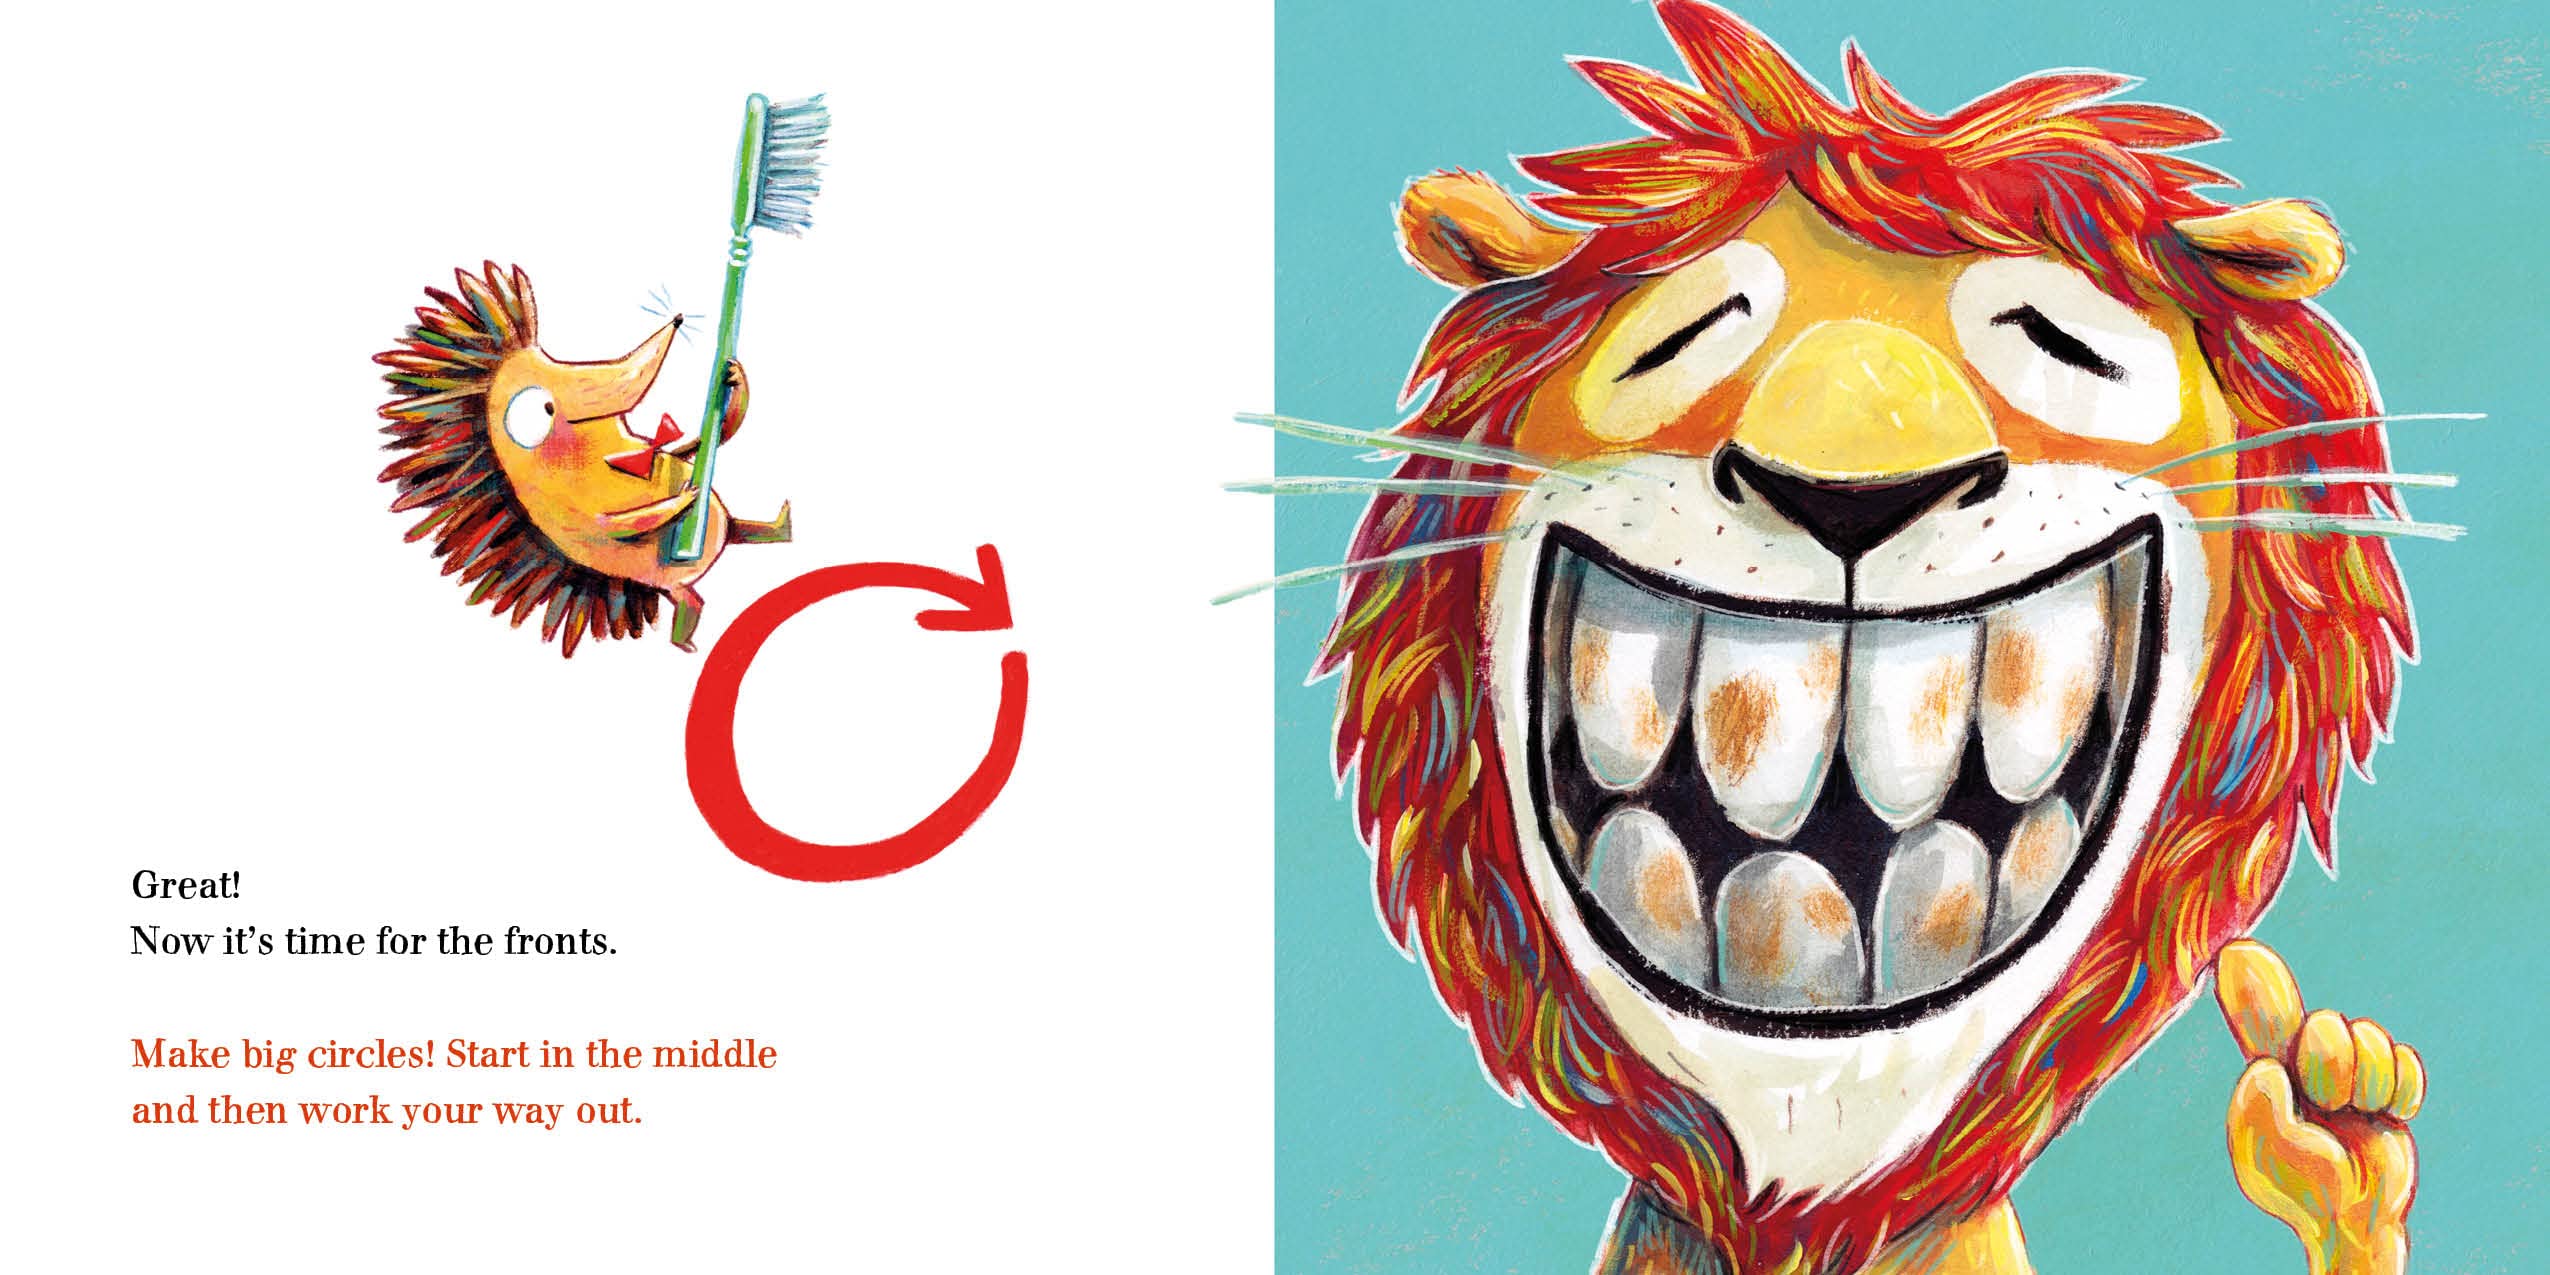 Help the Lion Brush His Teeth! (Parent Child Activity Book – Making Learning About Brushing Your Teeth Engaging and Fun for Toddlers Aged 2-4)